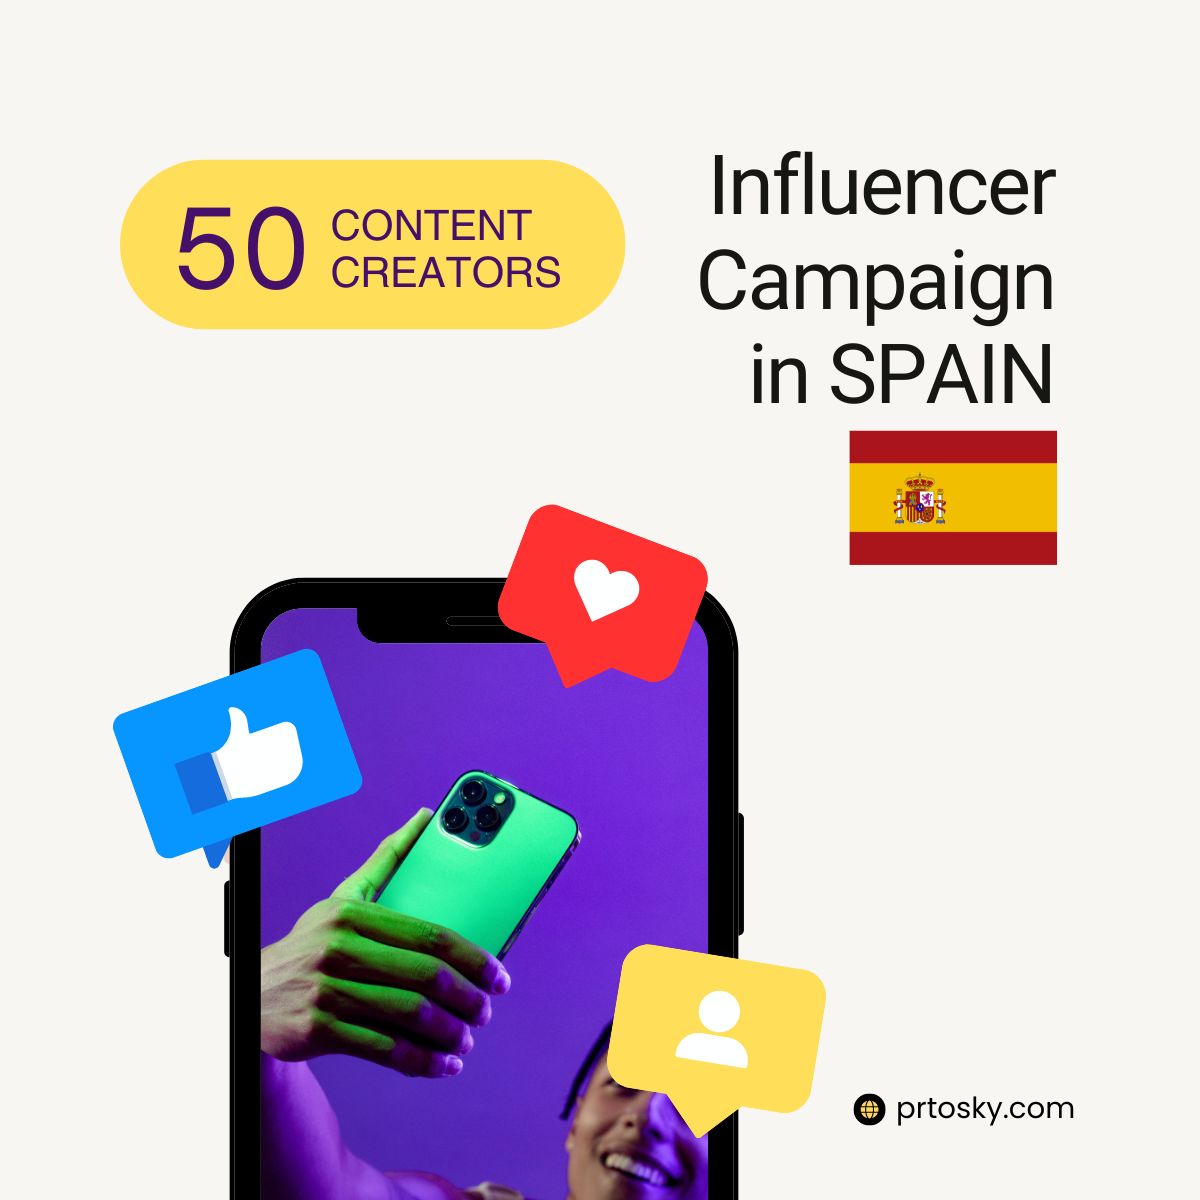 Influencer campaign in Spain with 50 content creators